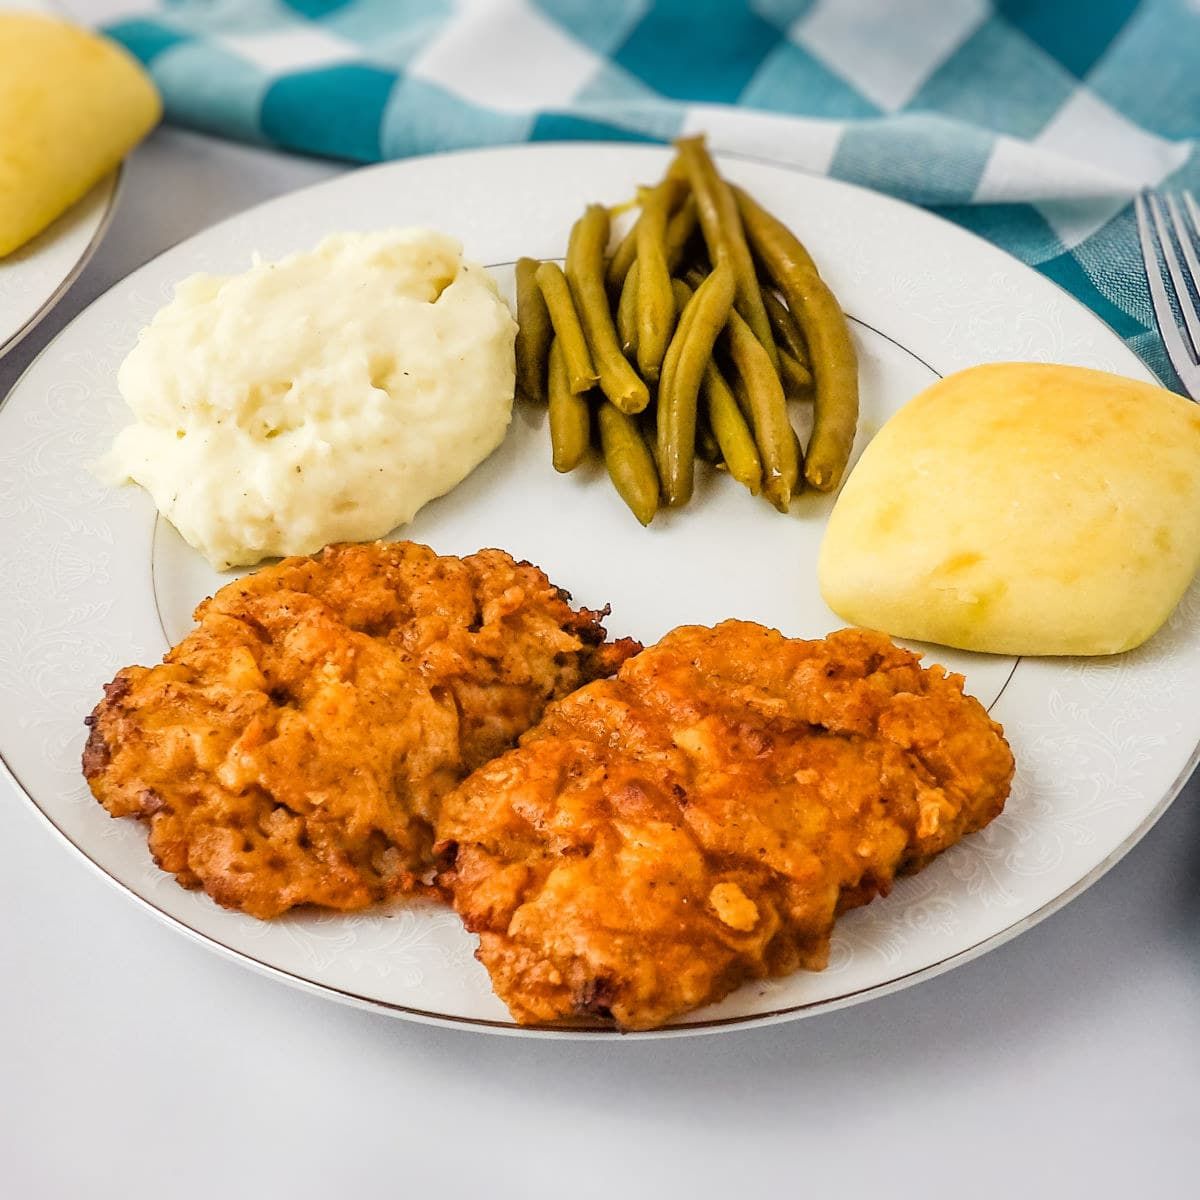 Crispy chicken fried elk steak with beans, mashed potatoes and bread on a plate.